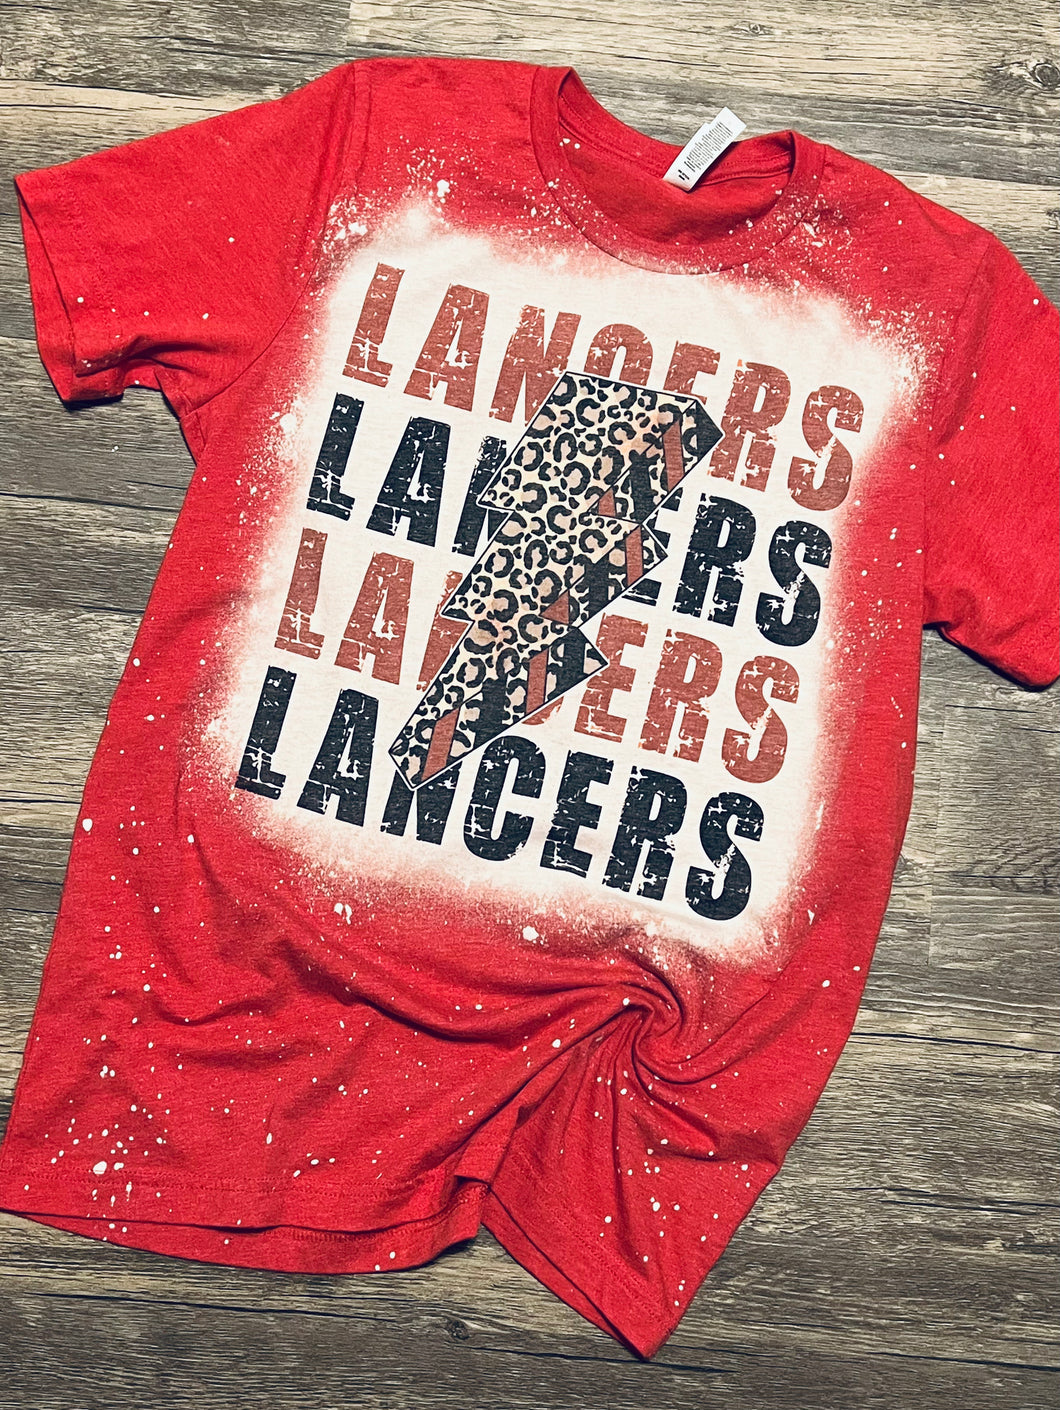 KIDS Lancers repeat leopard bolt red bleached graphic tee - Mavictoria Designs Hot Press Express